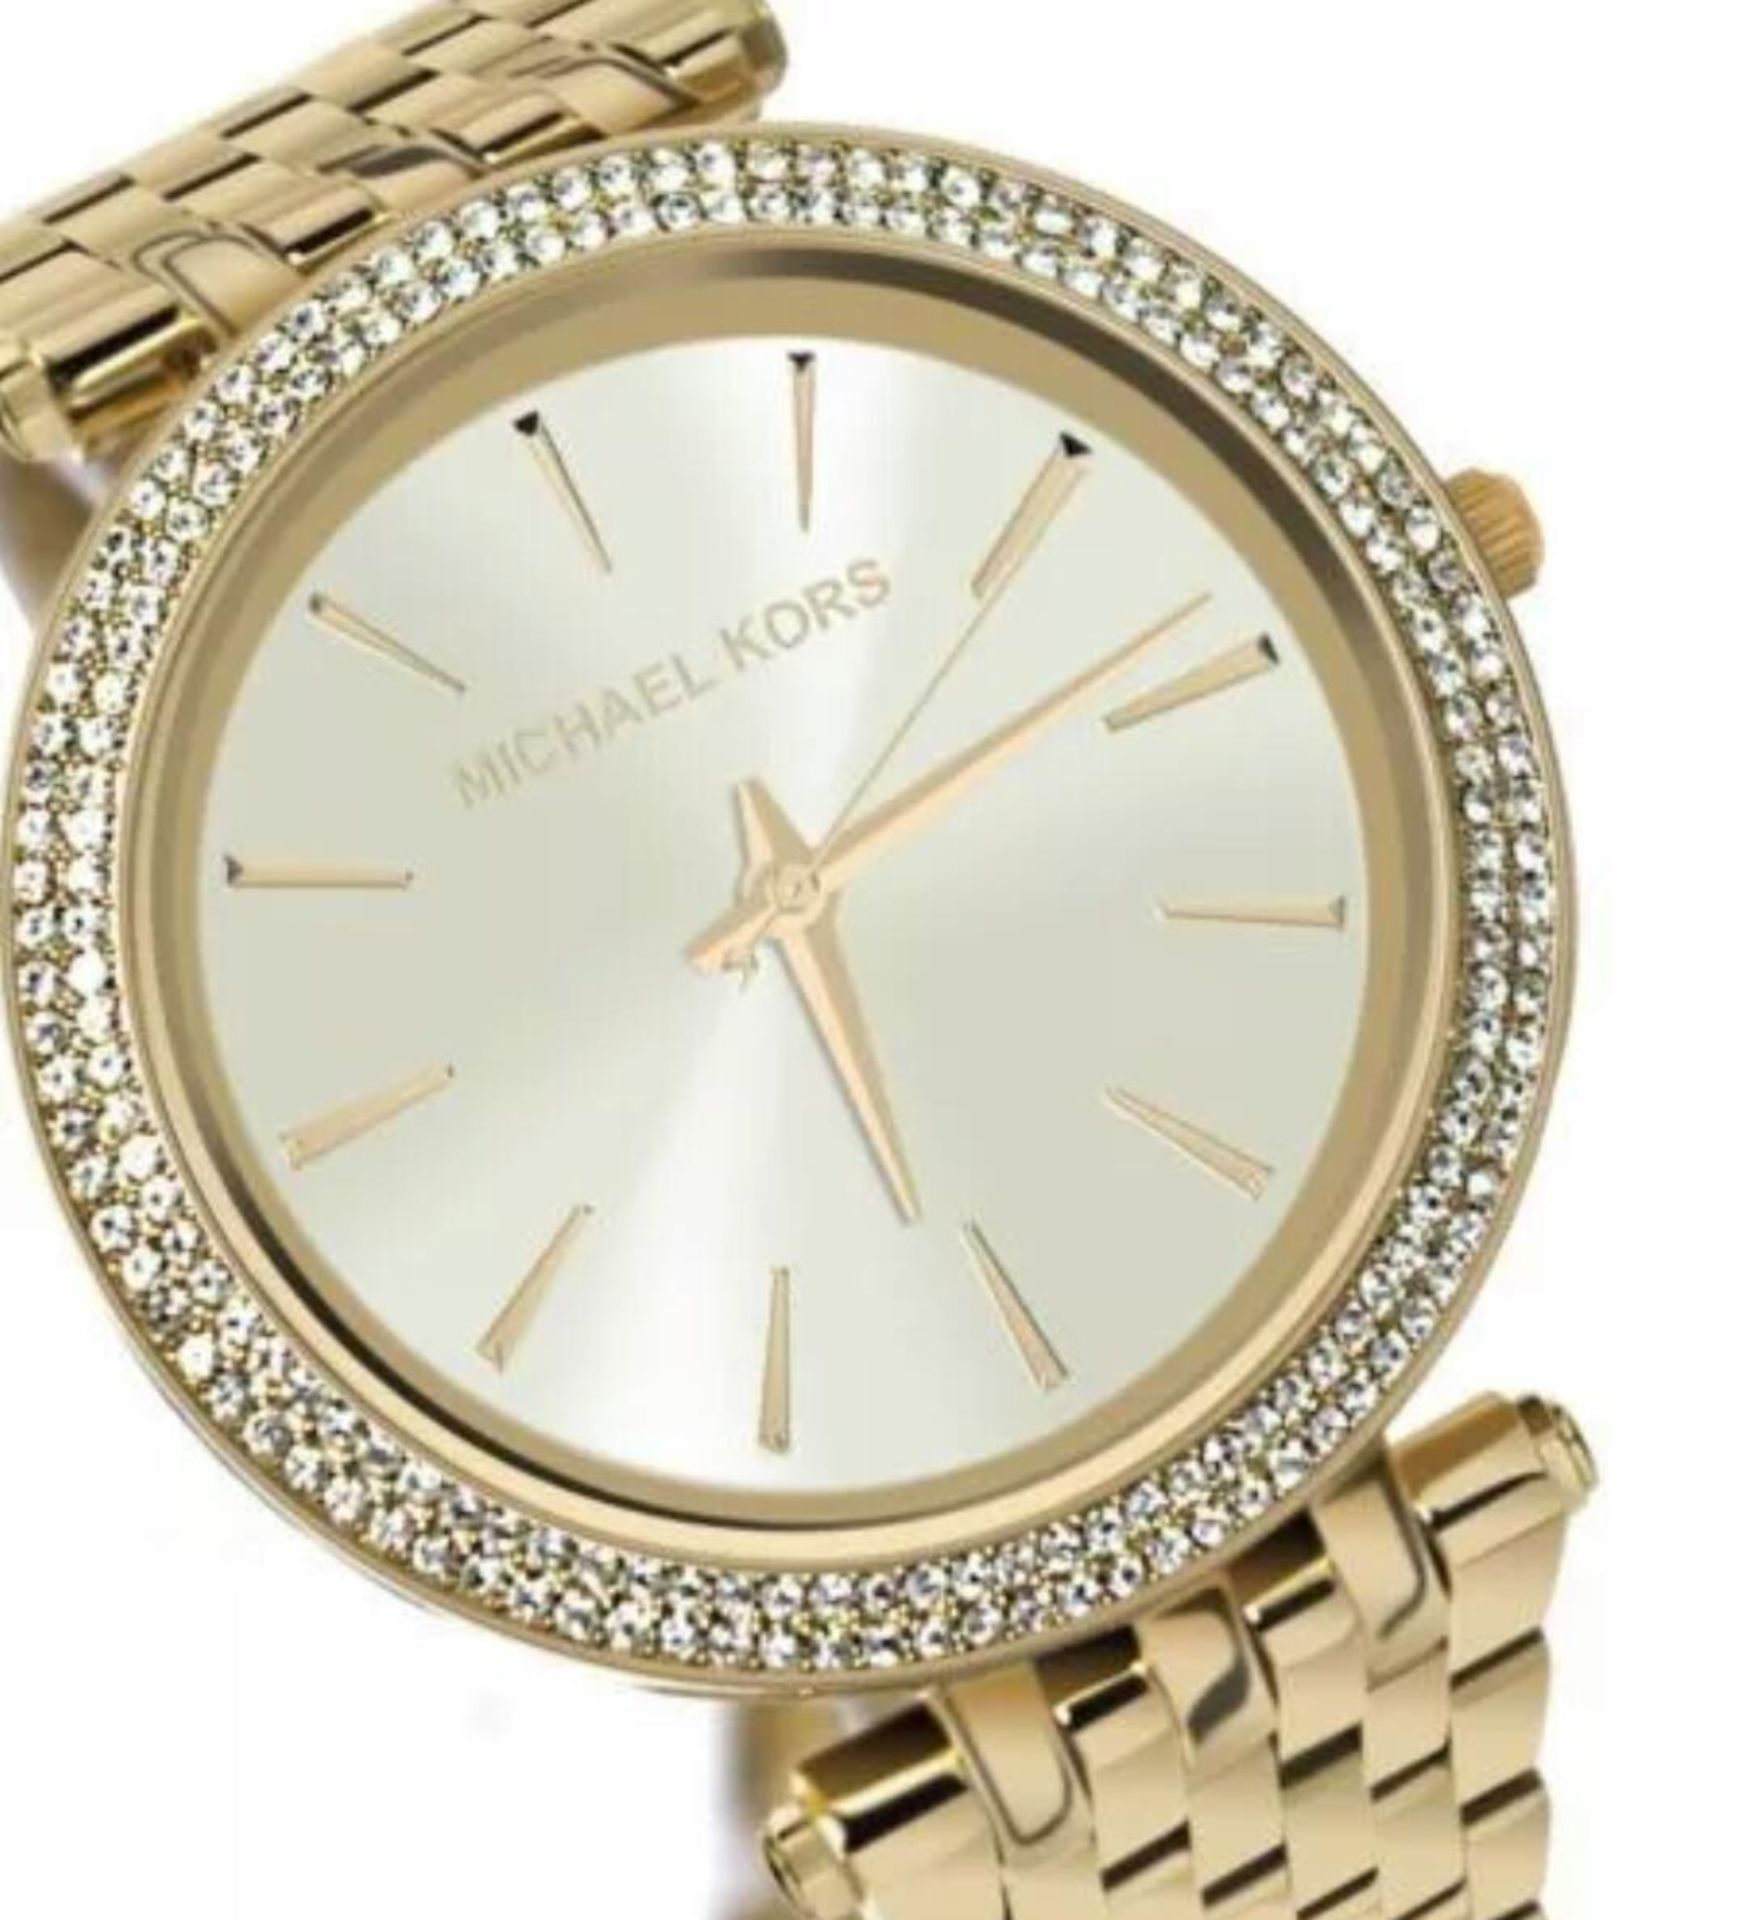 BRAND NEW MICHAEL KORS MK3191, LADIES DESIGNER WATCH, COMPLETE WITH ORIGINAL BOX AND MANUAL - RRP £